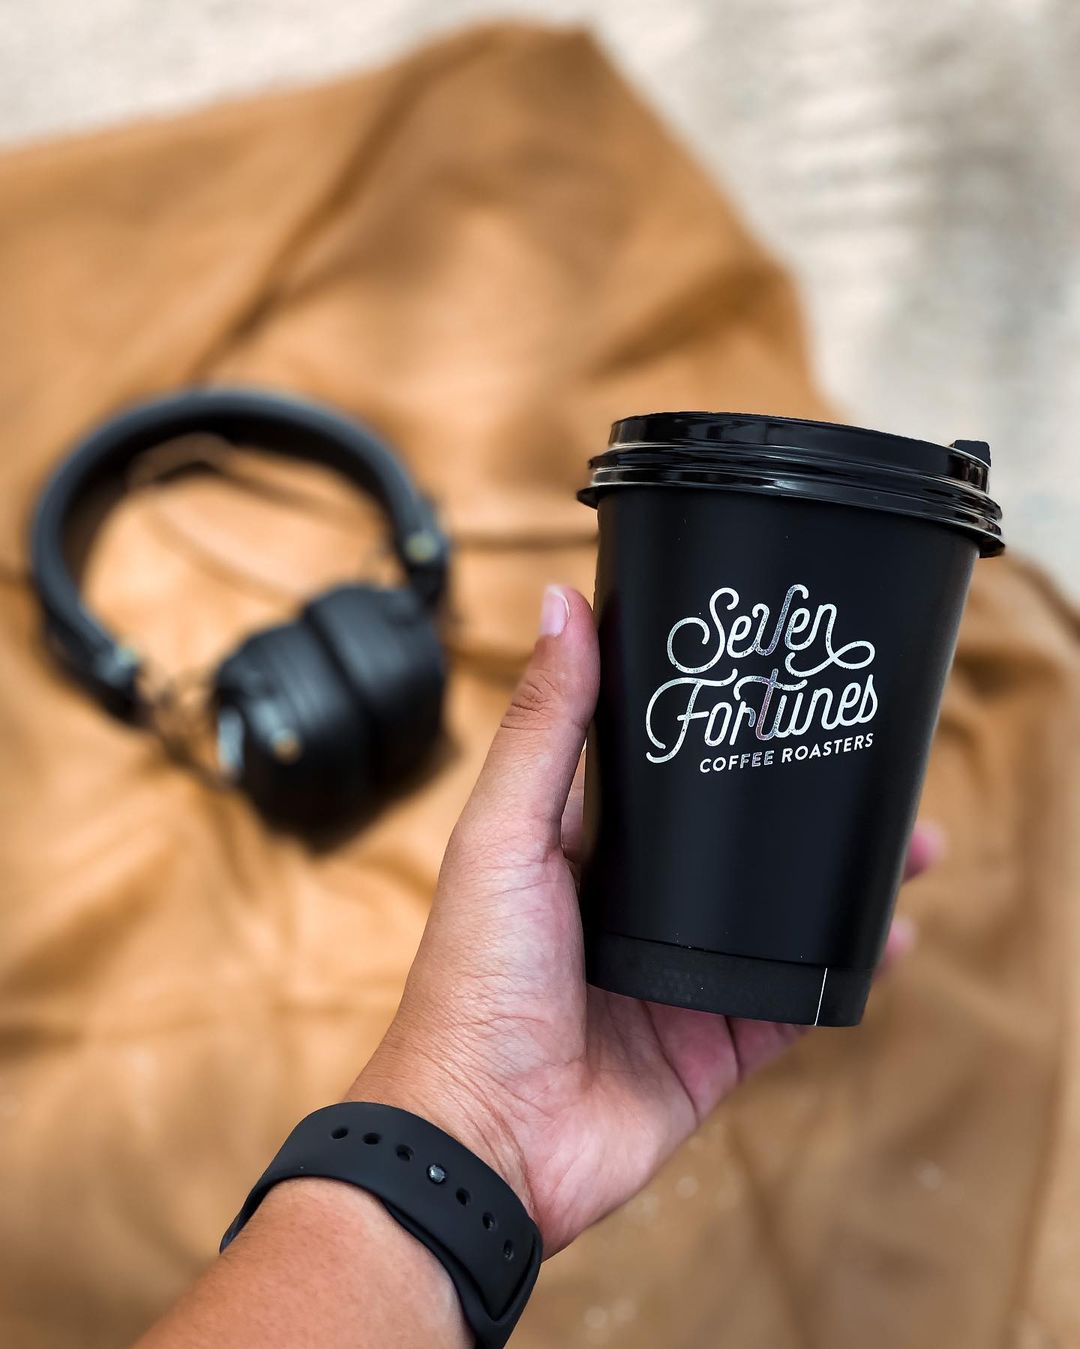 Foil version of Seven Fortunes logo on a black to-go cup